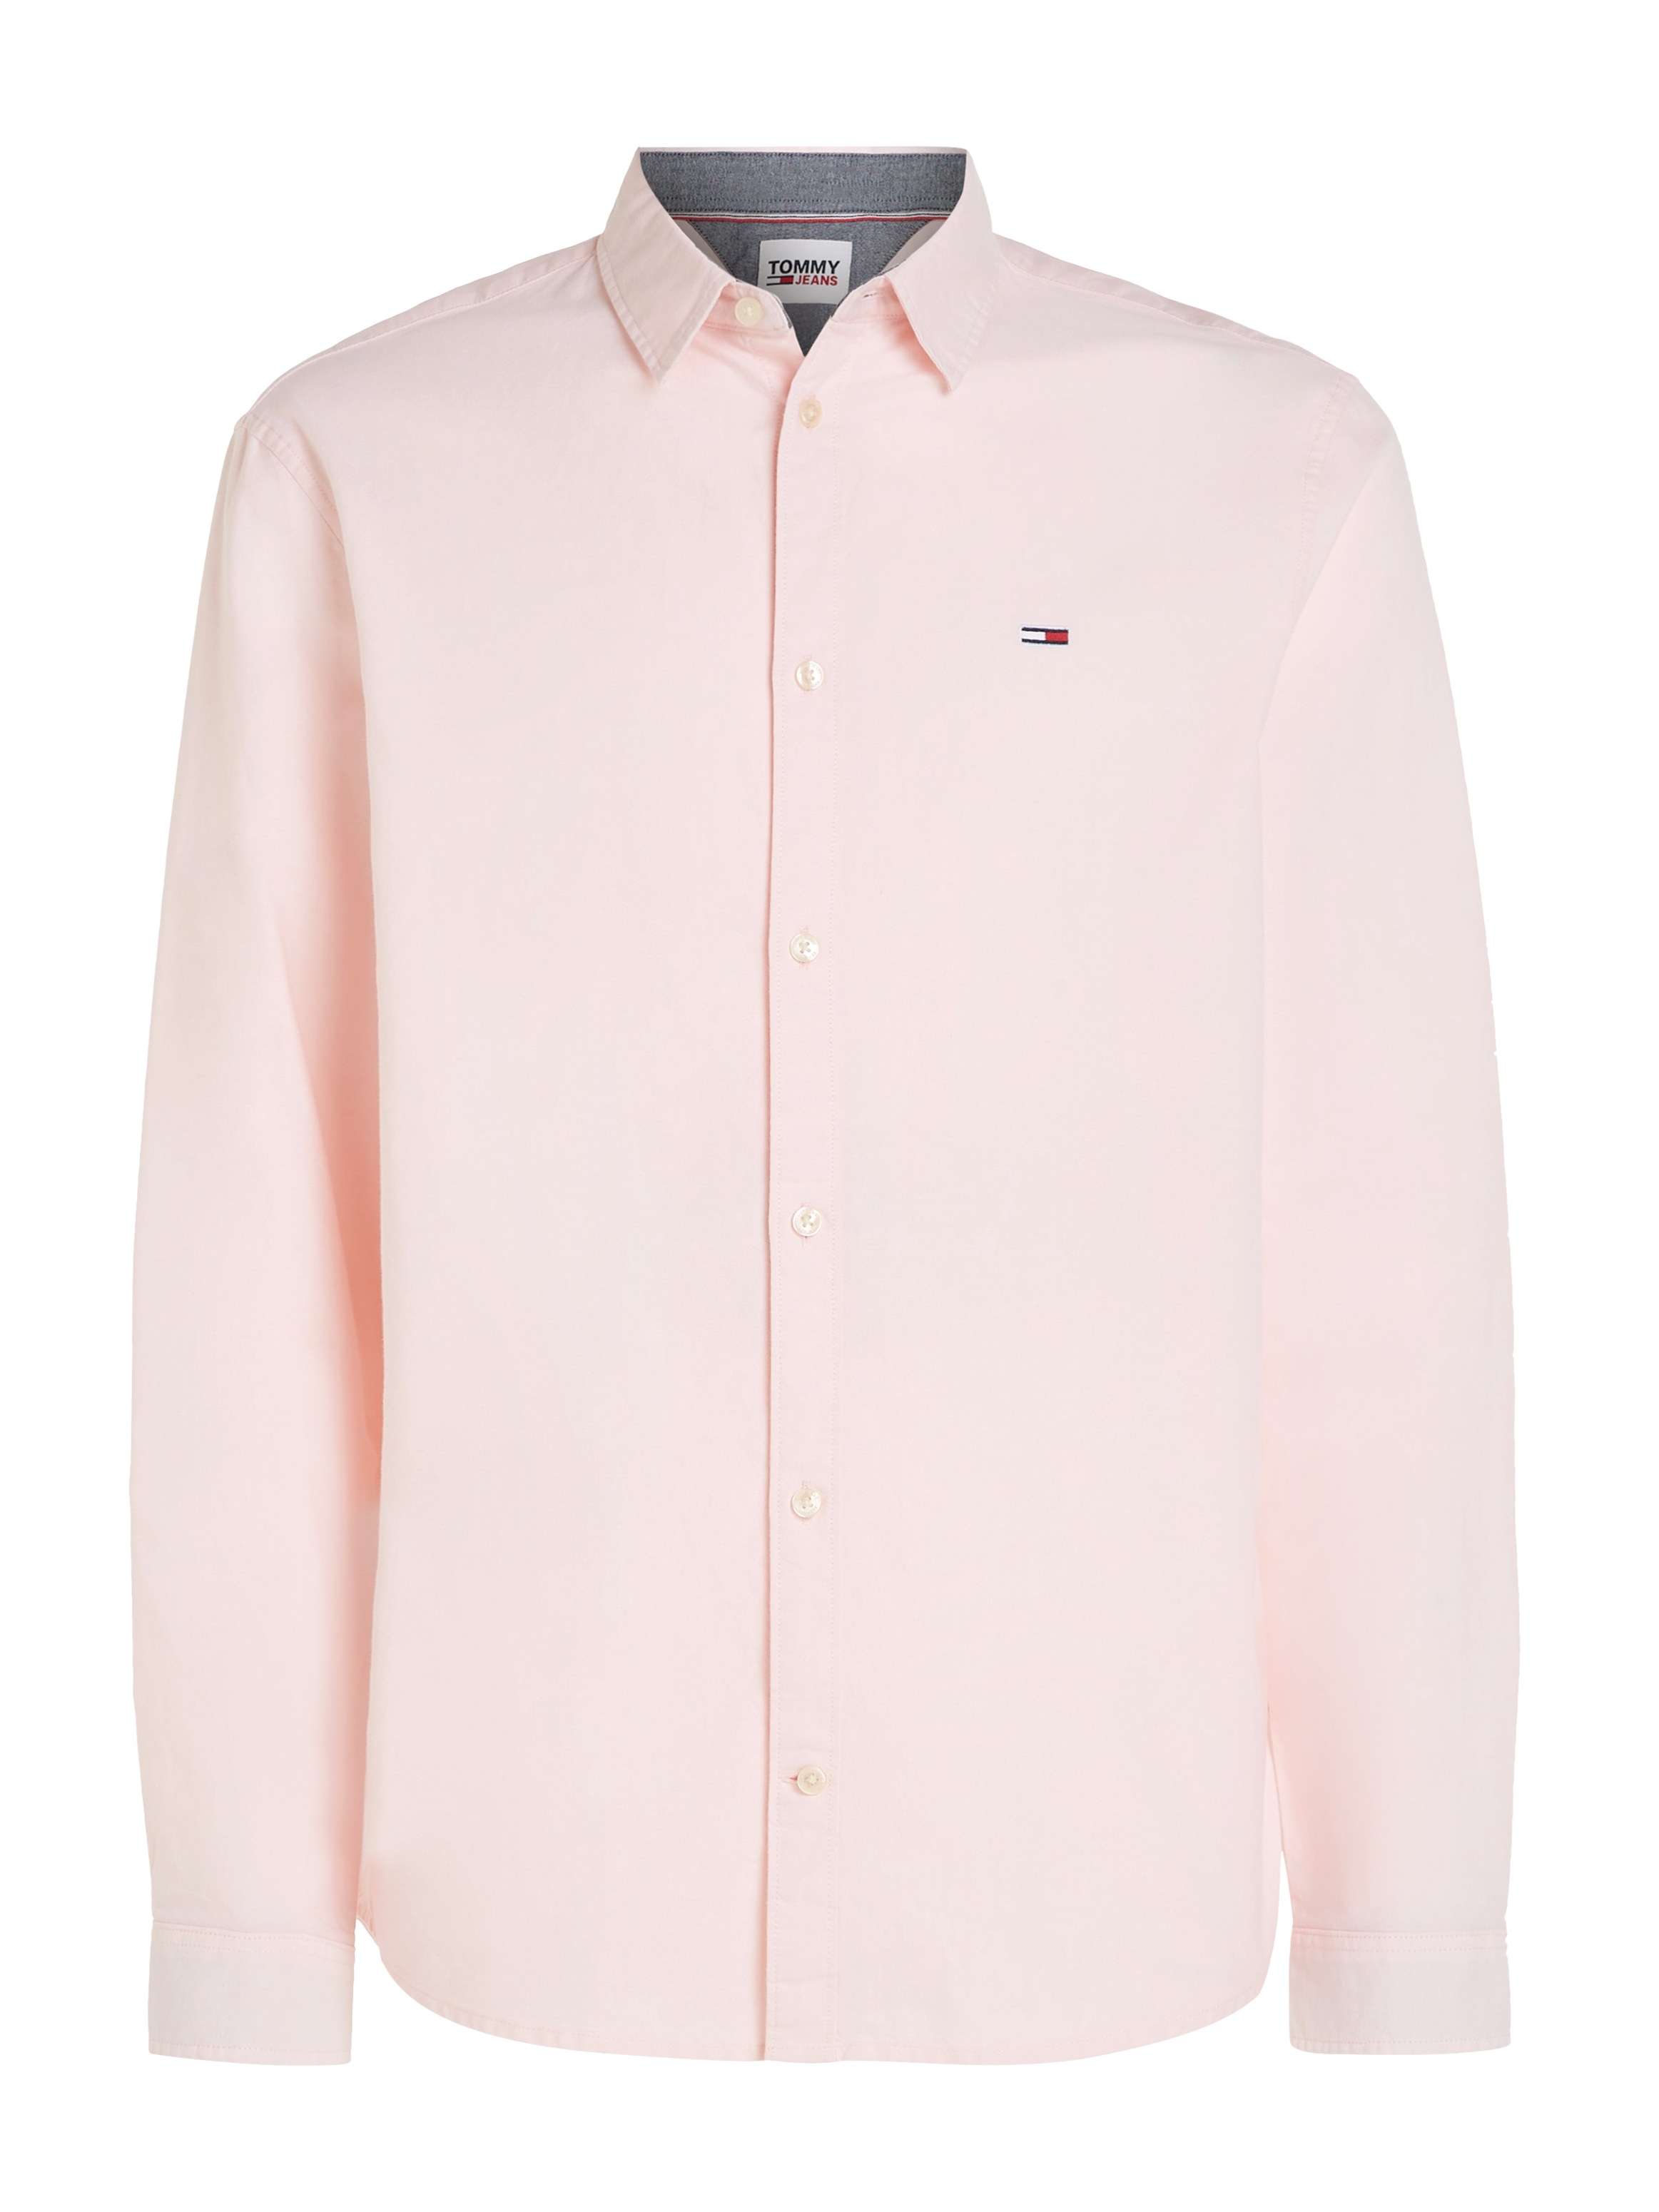 bei shoppen OTTO Jeans Langarmhemd CLASSIC SHIRT« OXFORD Tommy online »TJM